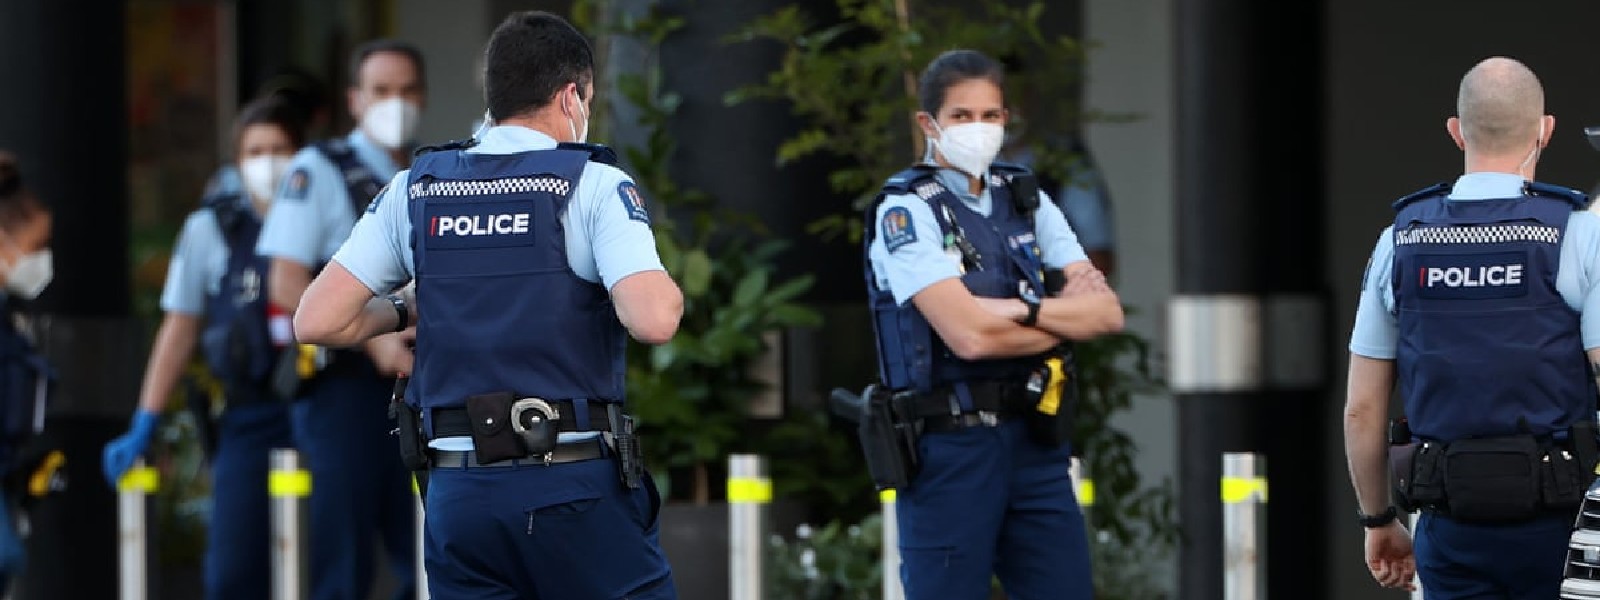 Sri Lankan extremist shot dead in New Zealand after a stabbing rampage